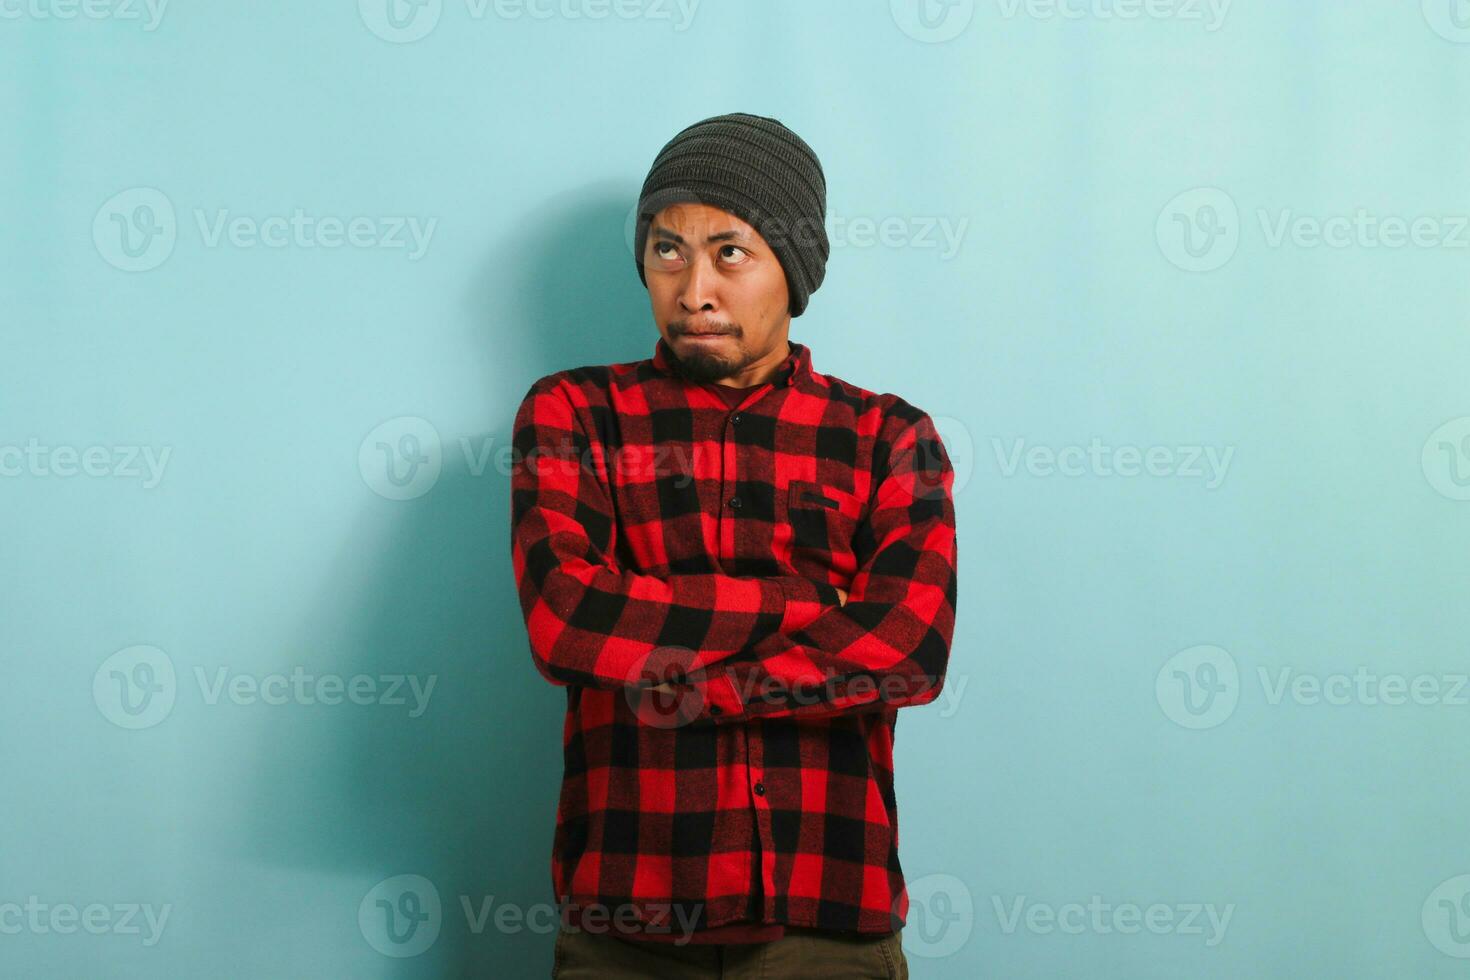 An angry young Asian man with a beanie hat and a red plaid flannel shirt keeps his arms folded, waiting for explanations with an annoyed and disapproving expression, isolated on a blue background photo